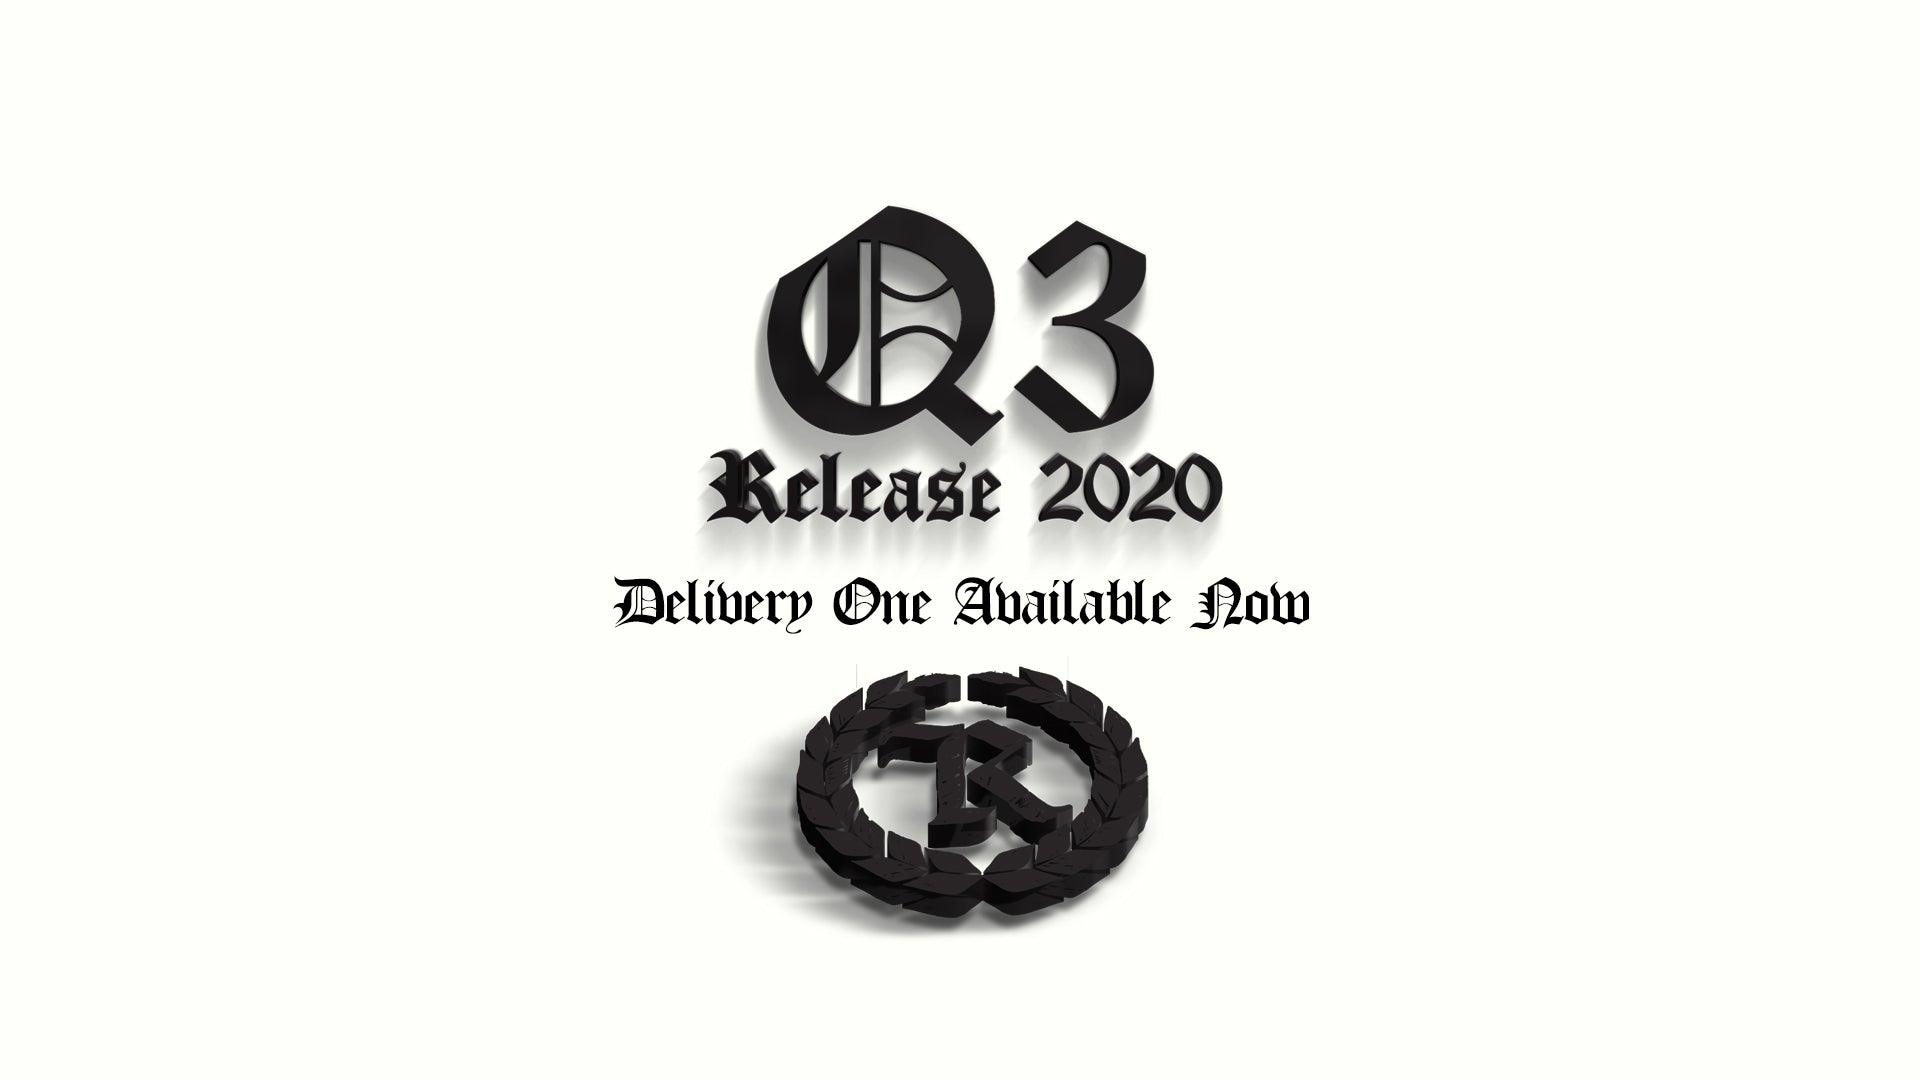 Q3 Release 2020 [FIRST DELIVERY] Available Now - Represent Ltd.™